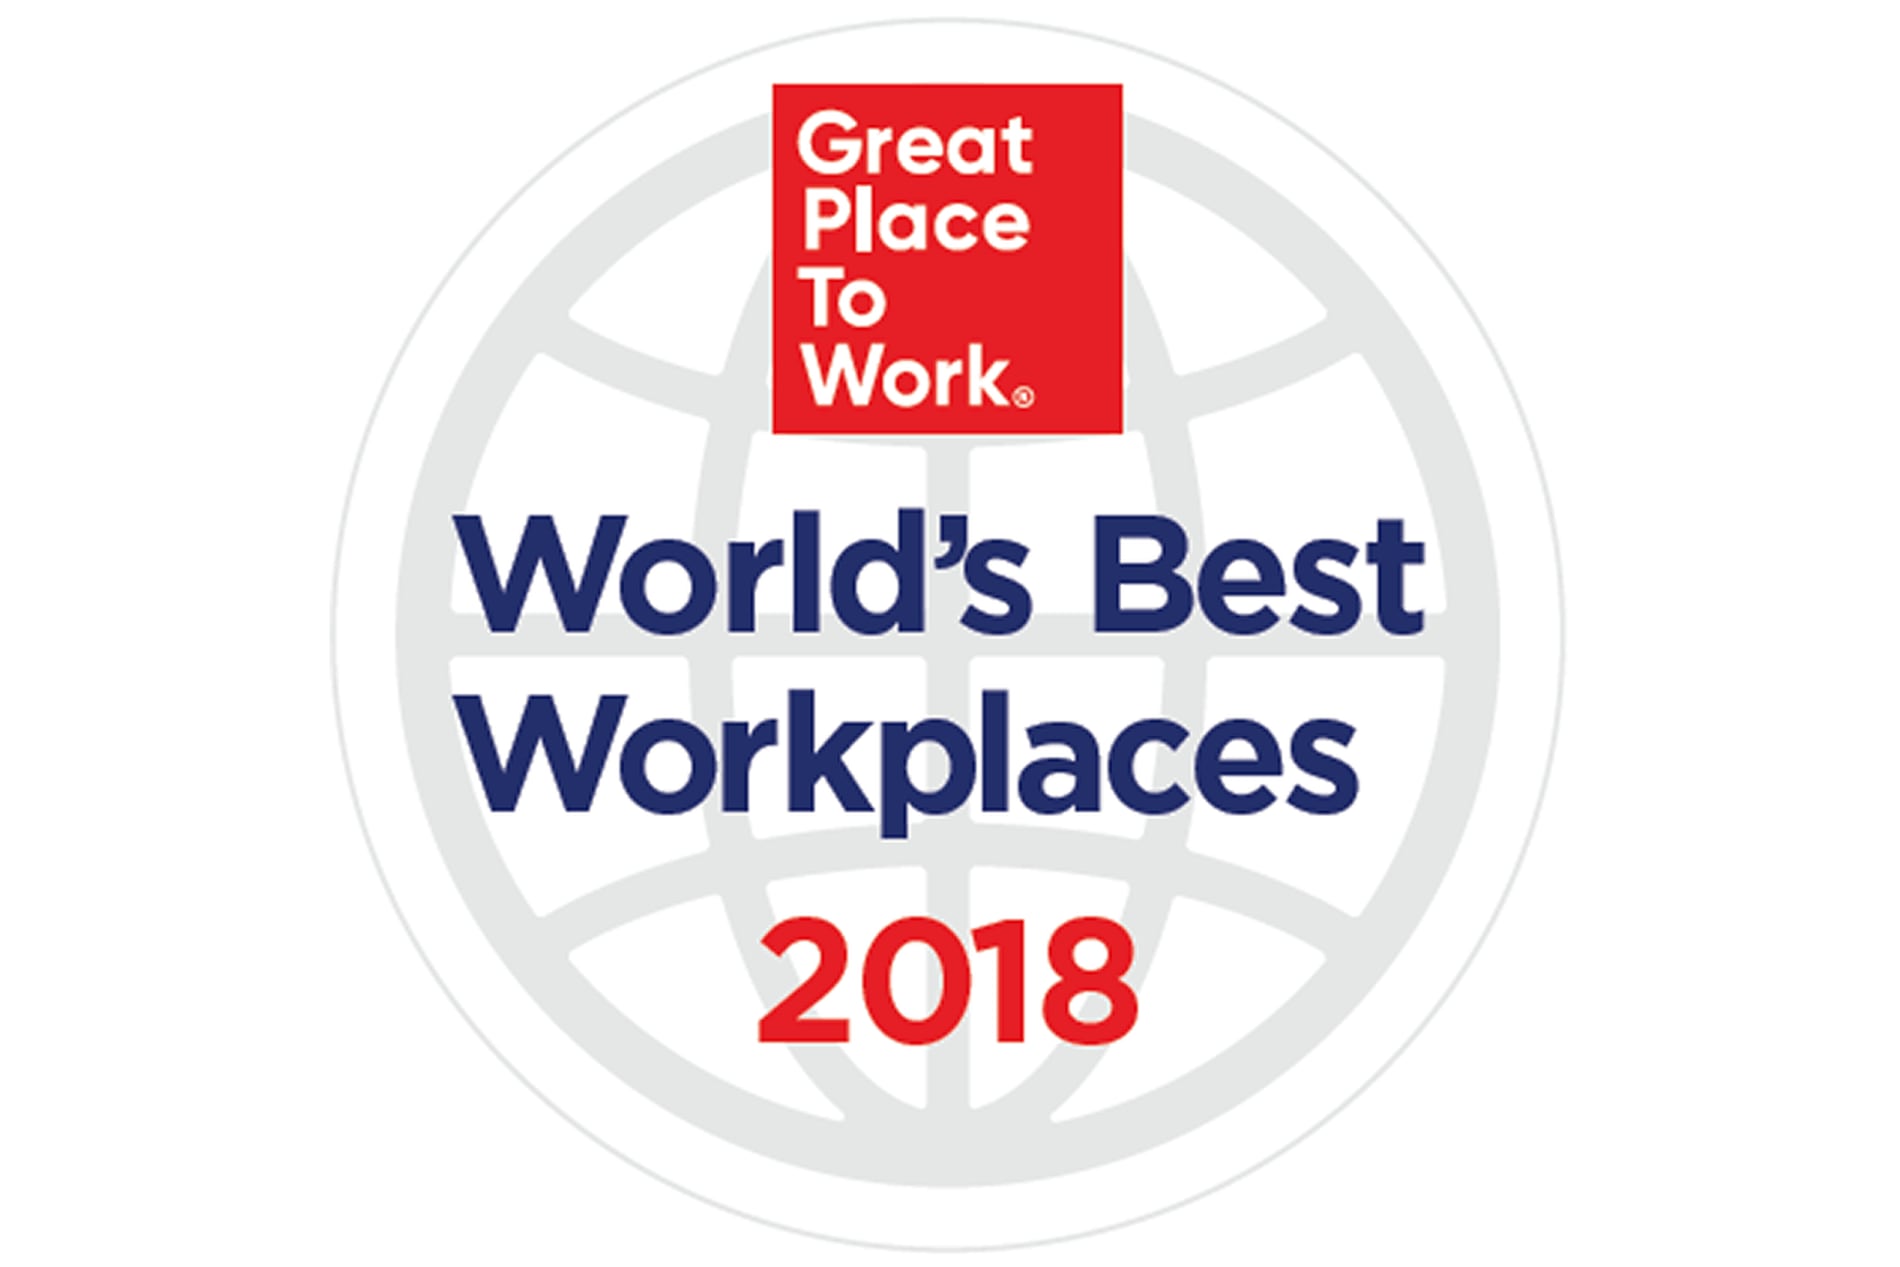 World’s best workplaces - The Globe and Mail